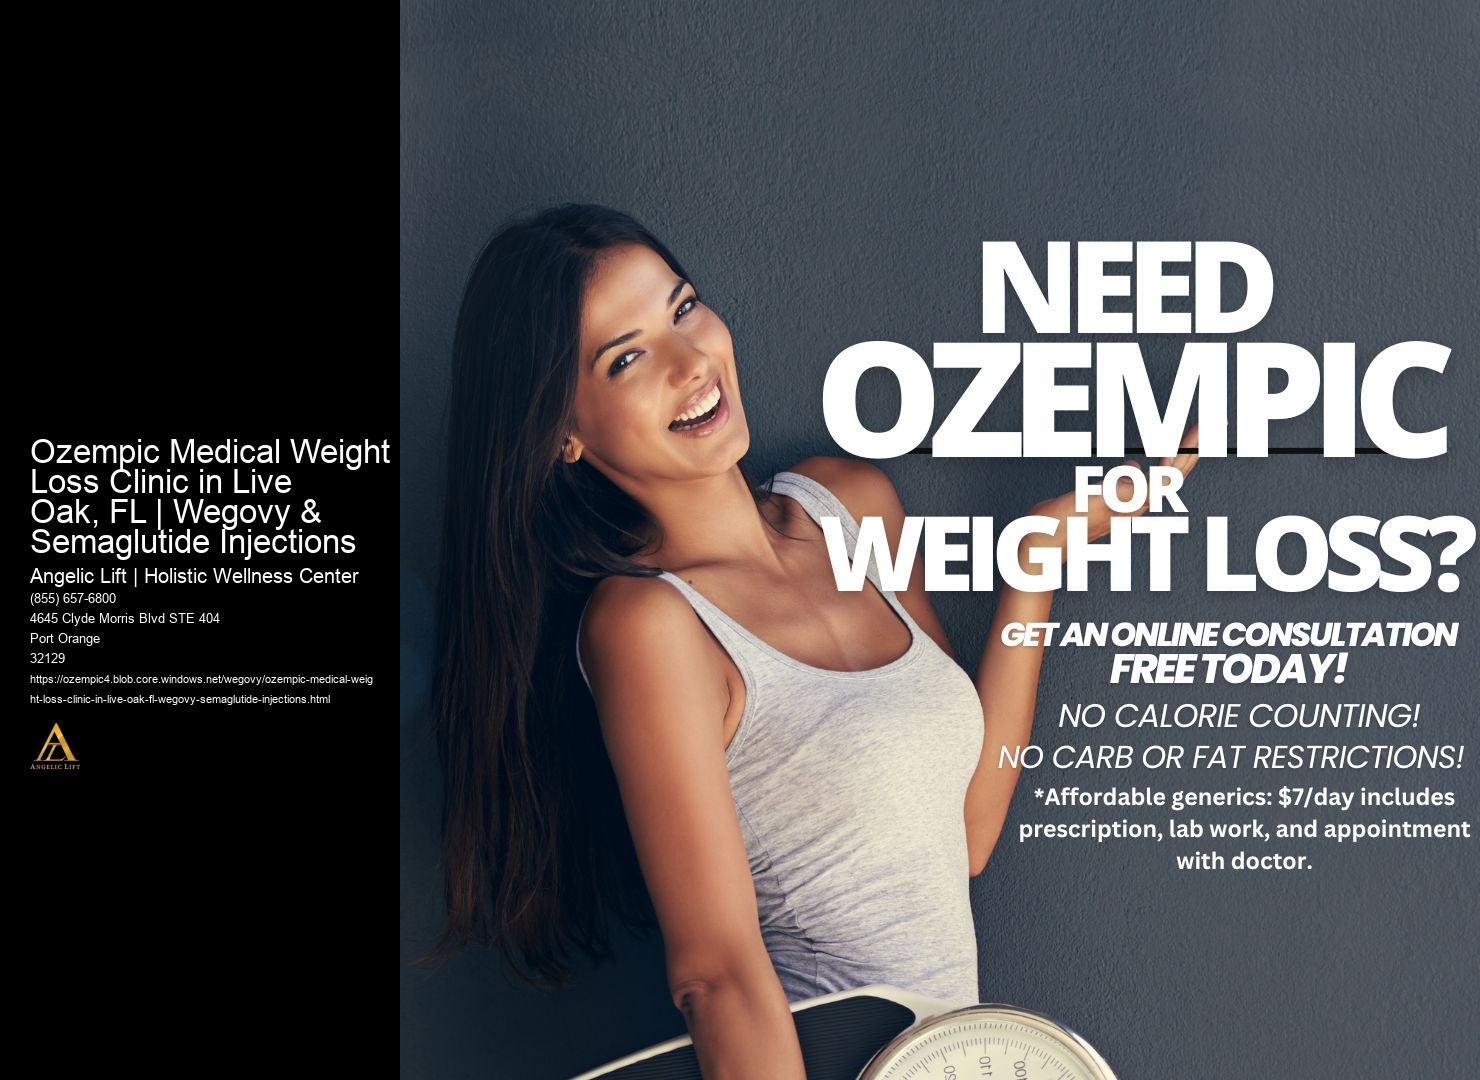 Ozempic Medical Weight Loss Clinic in Live Oak, FL | Wegovy & Semaglutide Injections